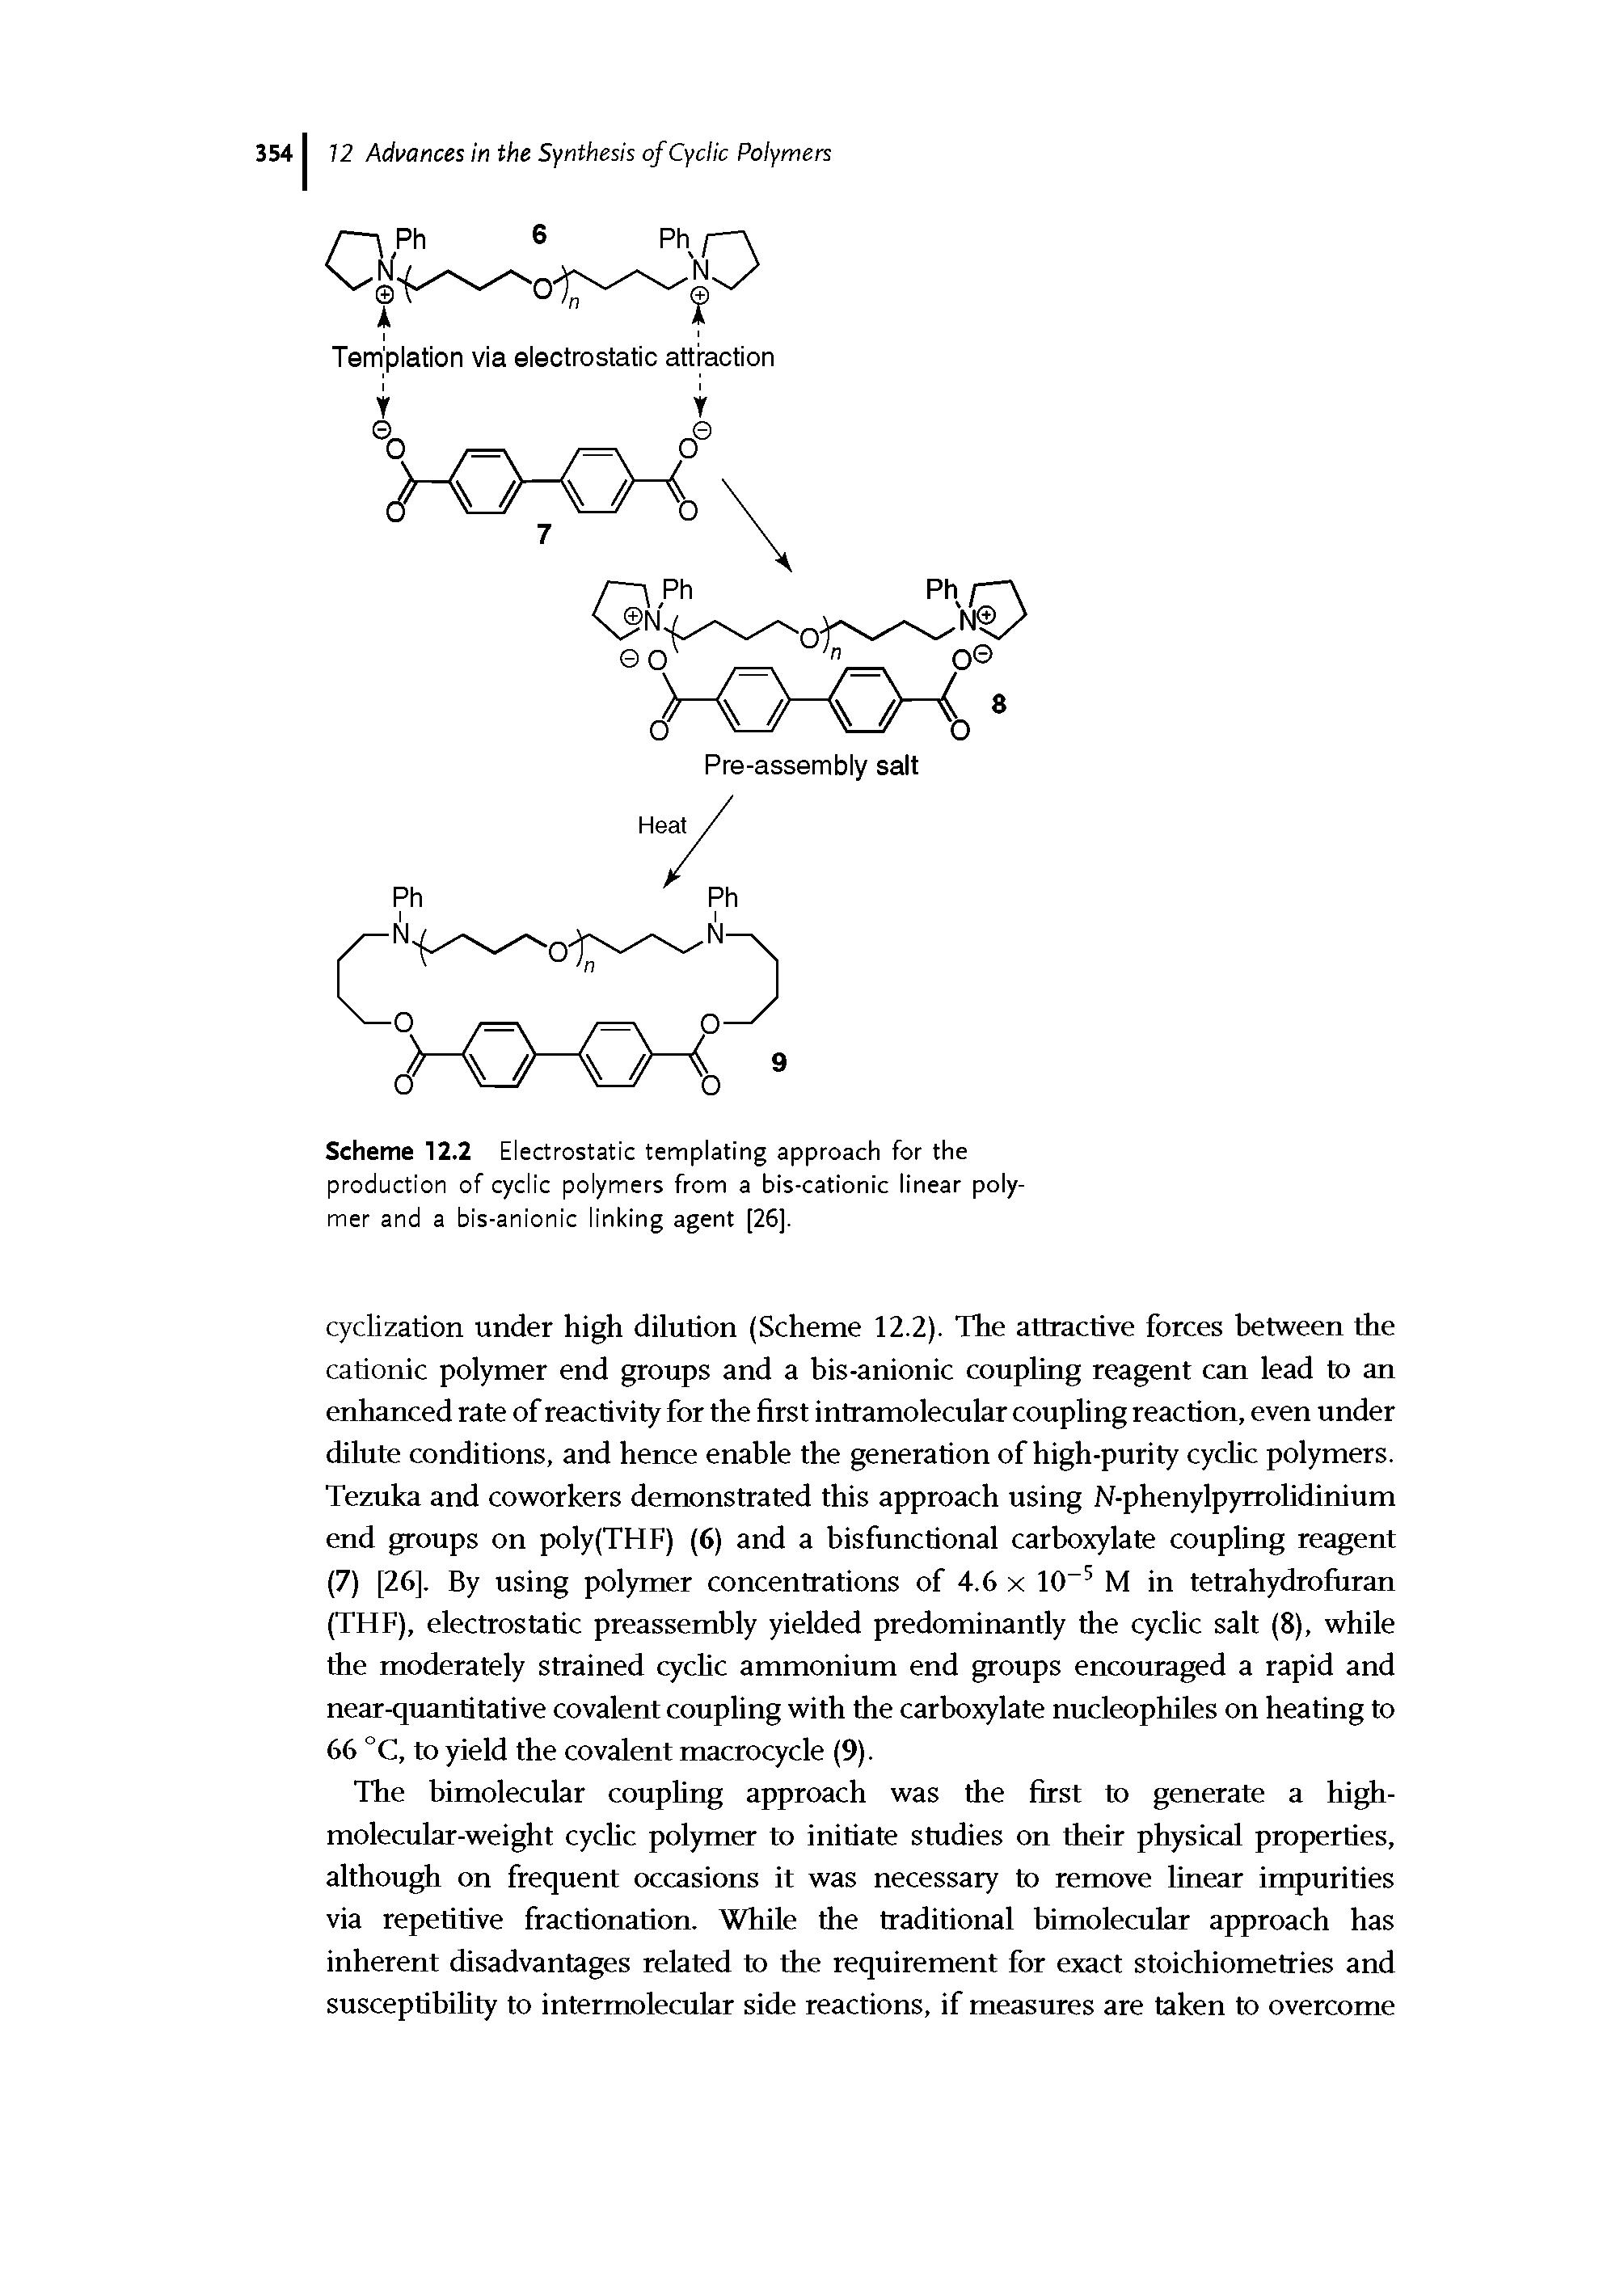 Scheme 12.2 Electrostatic templating approach for the production of cyclic polymers from a bis-cationic linear polymer and a bis-anionic linking agent [26].